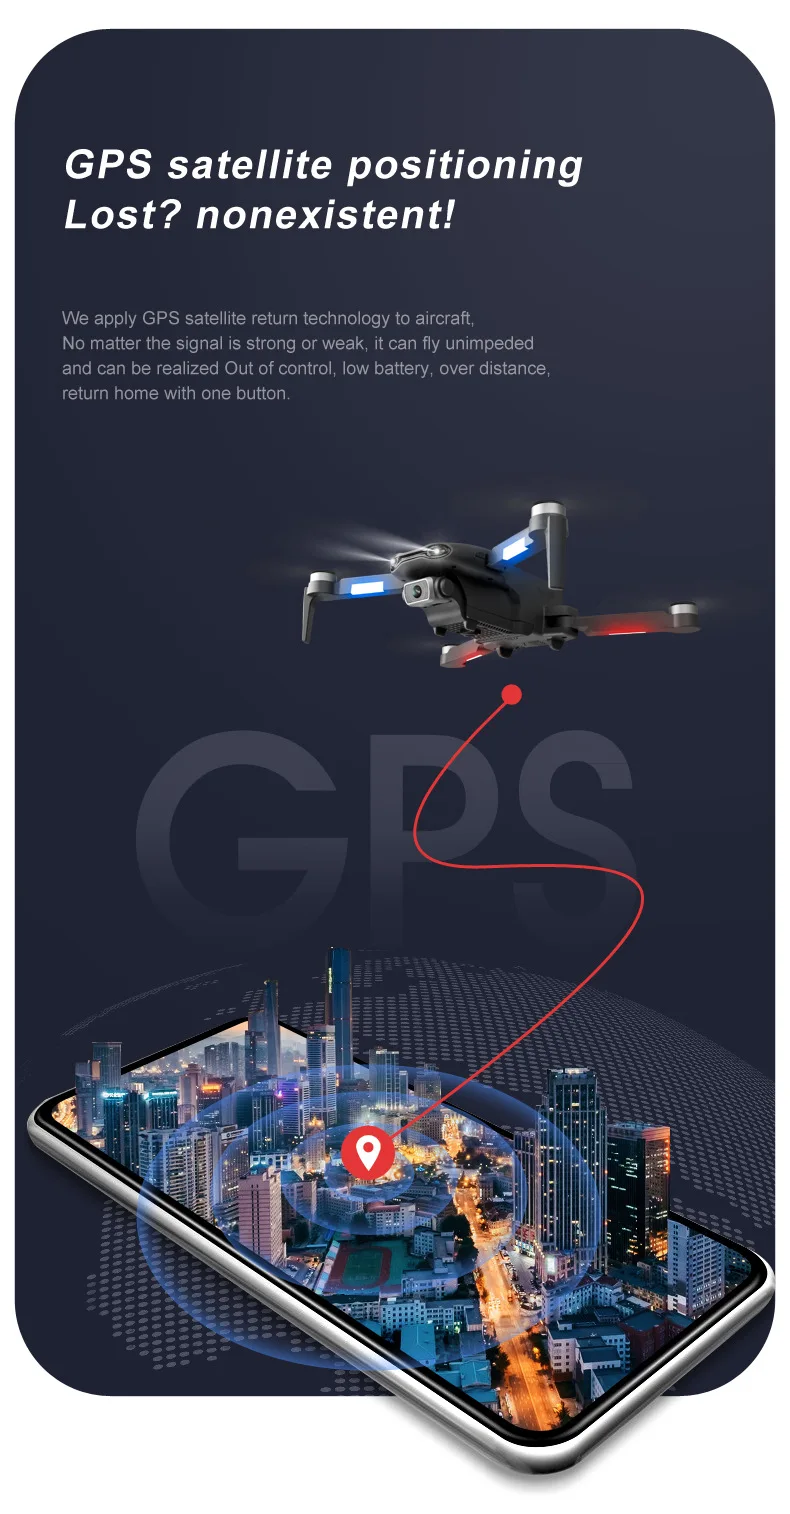 gps satellite return technology can fly unimpeded and can